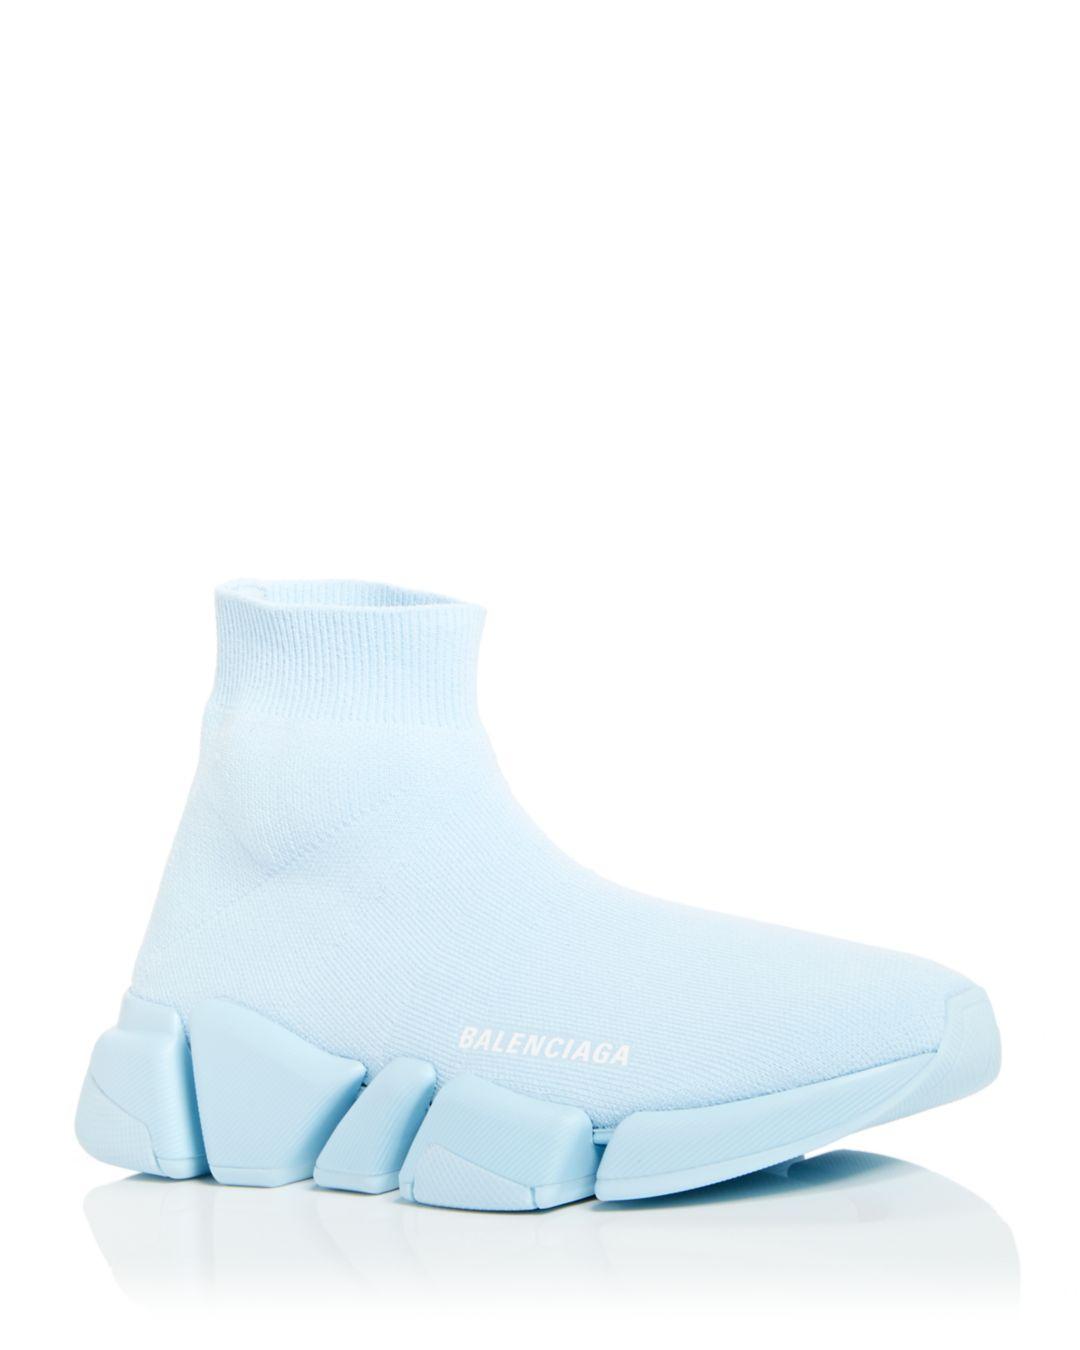 Balenciaga Speed 2.0 Knit High Top Sock Sneakers in Blue | Lyst